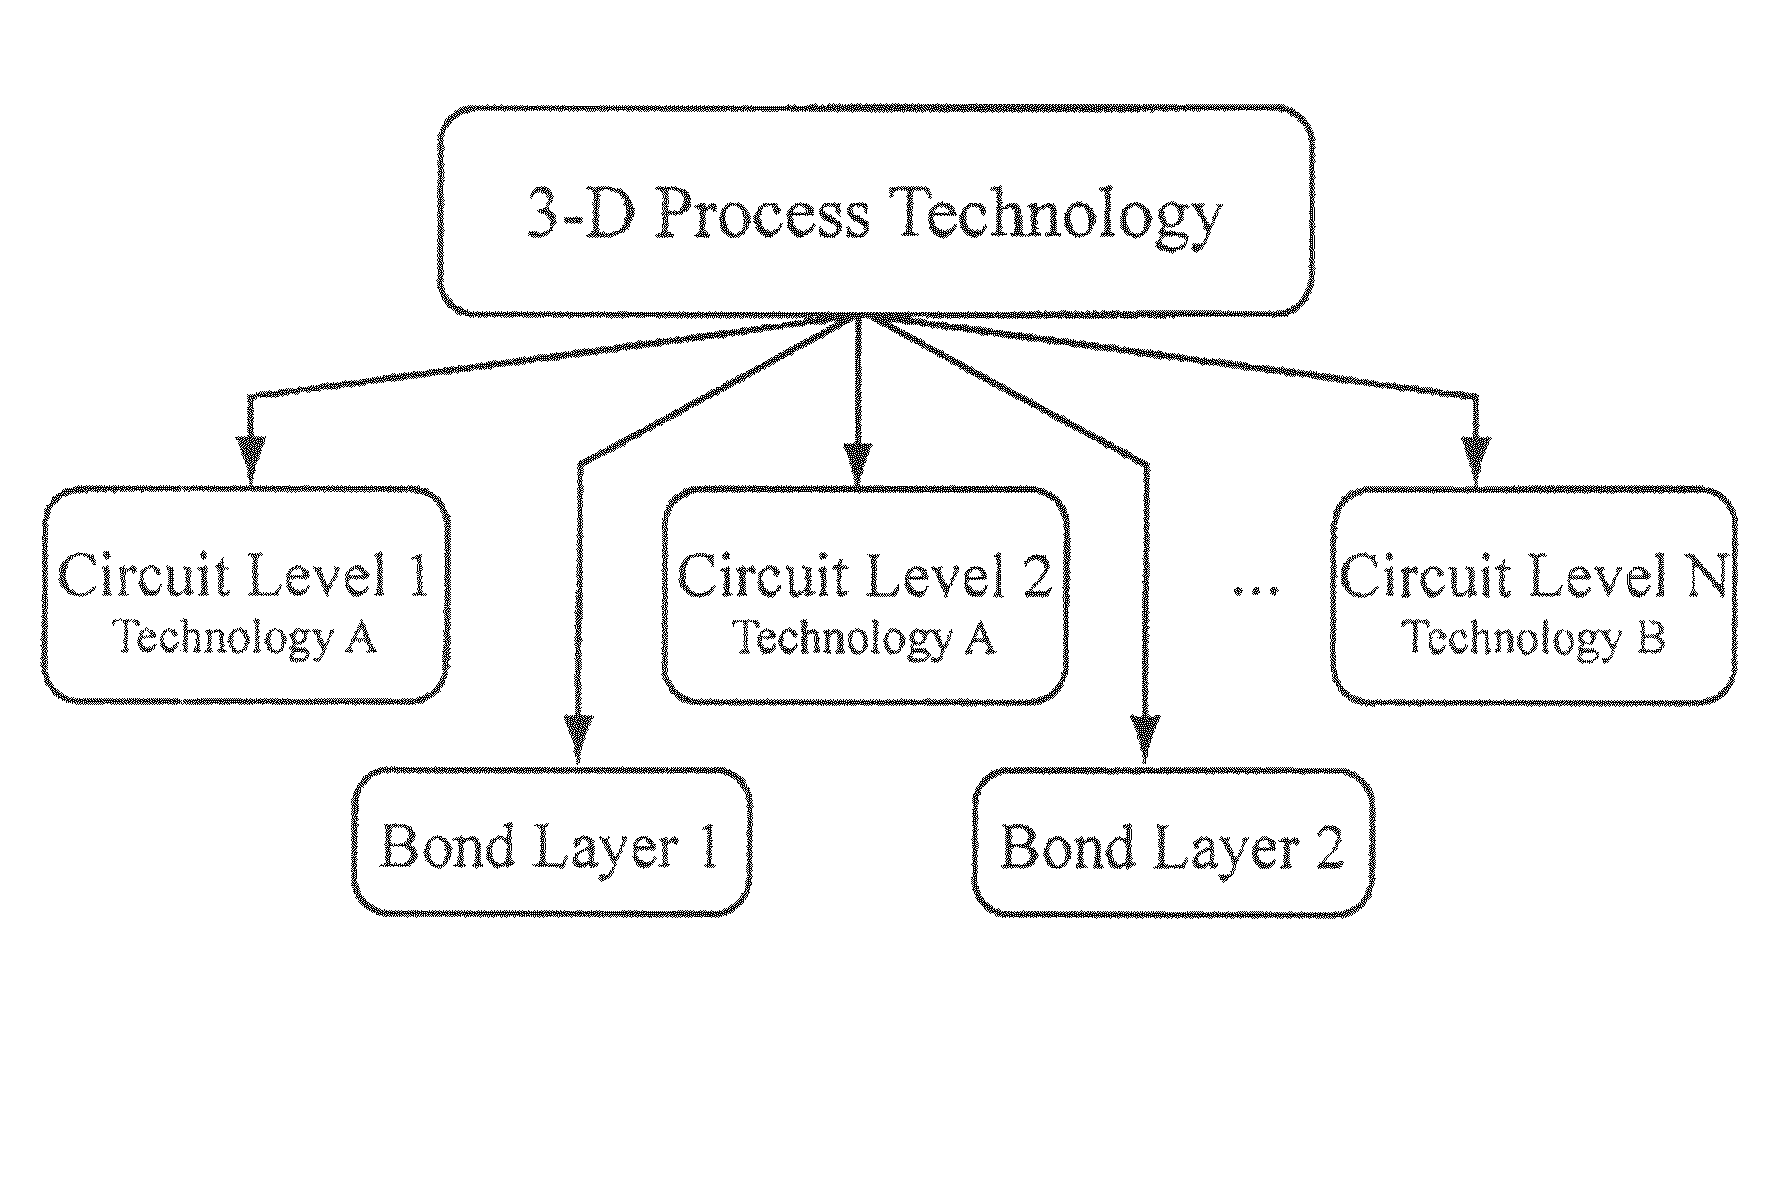 Methods and systems for computer aided design of 3D integrated circuits